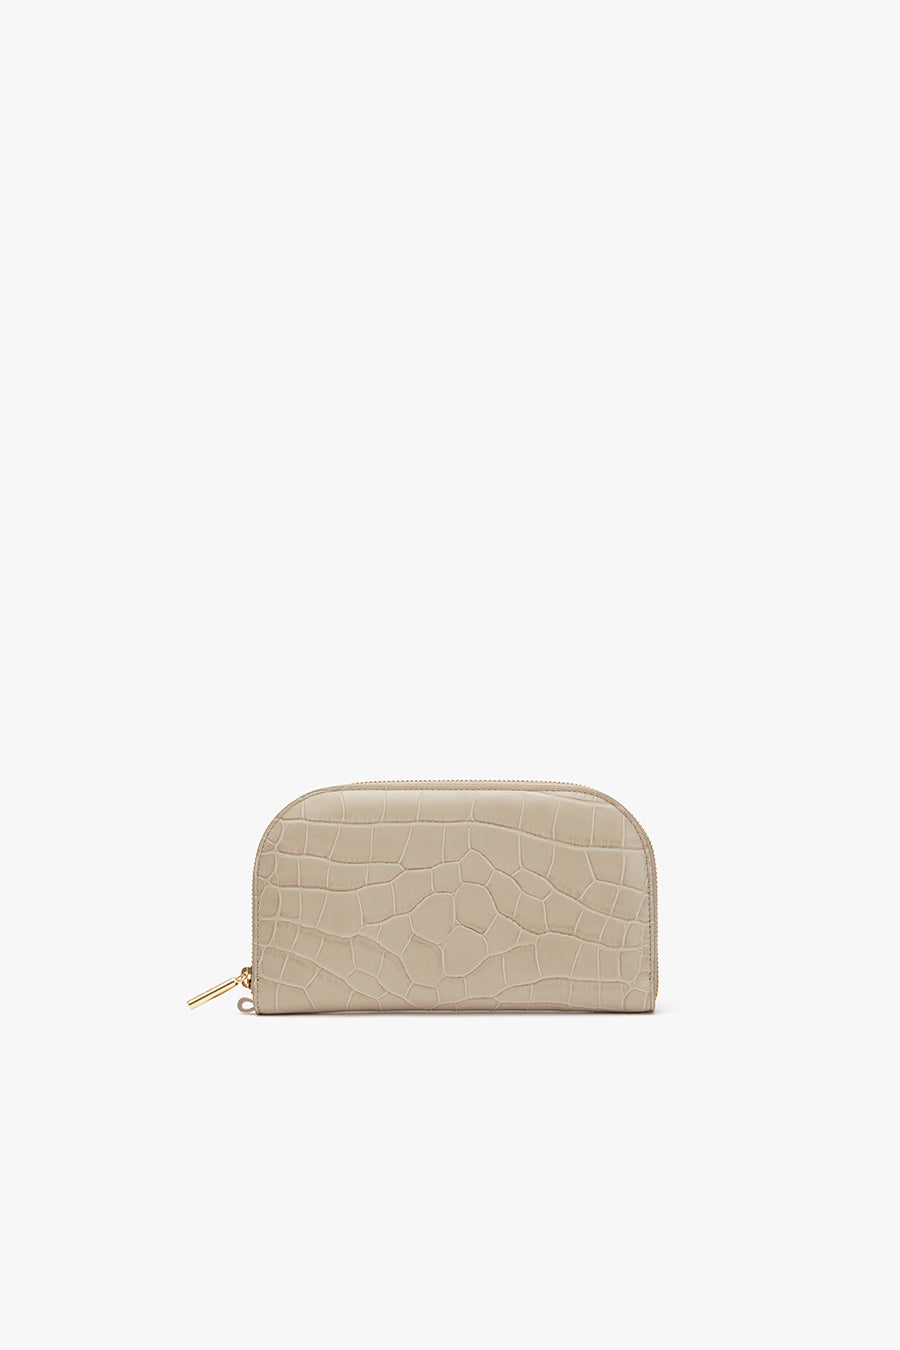 Ethically-Made Zip Wallets by Baggu, Cuyana, & Everlane - Welcome Objects